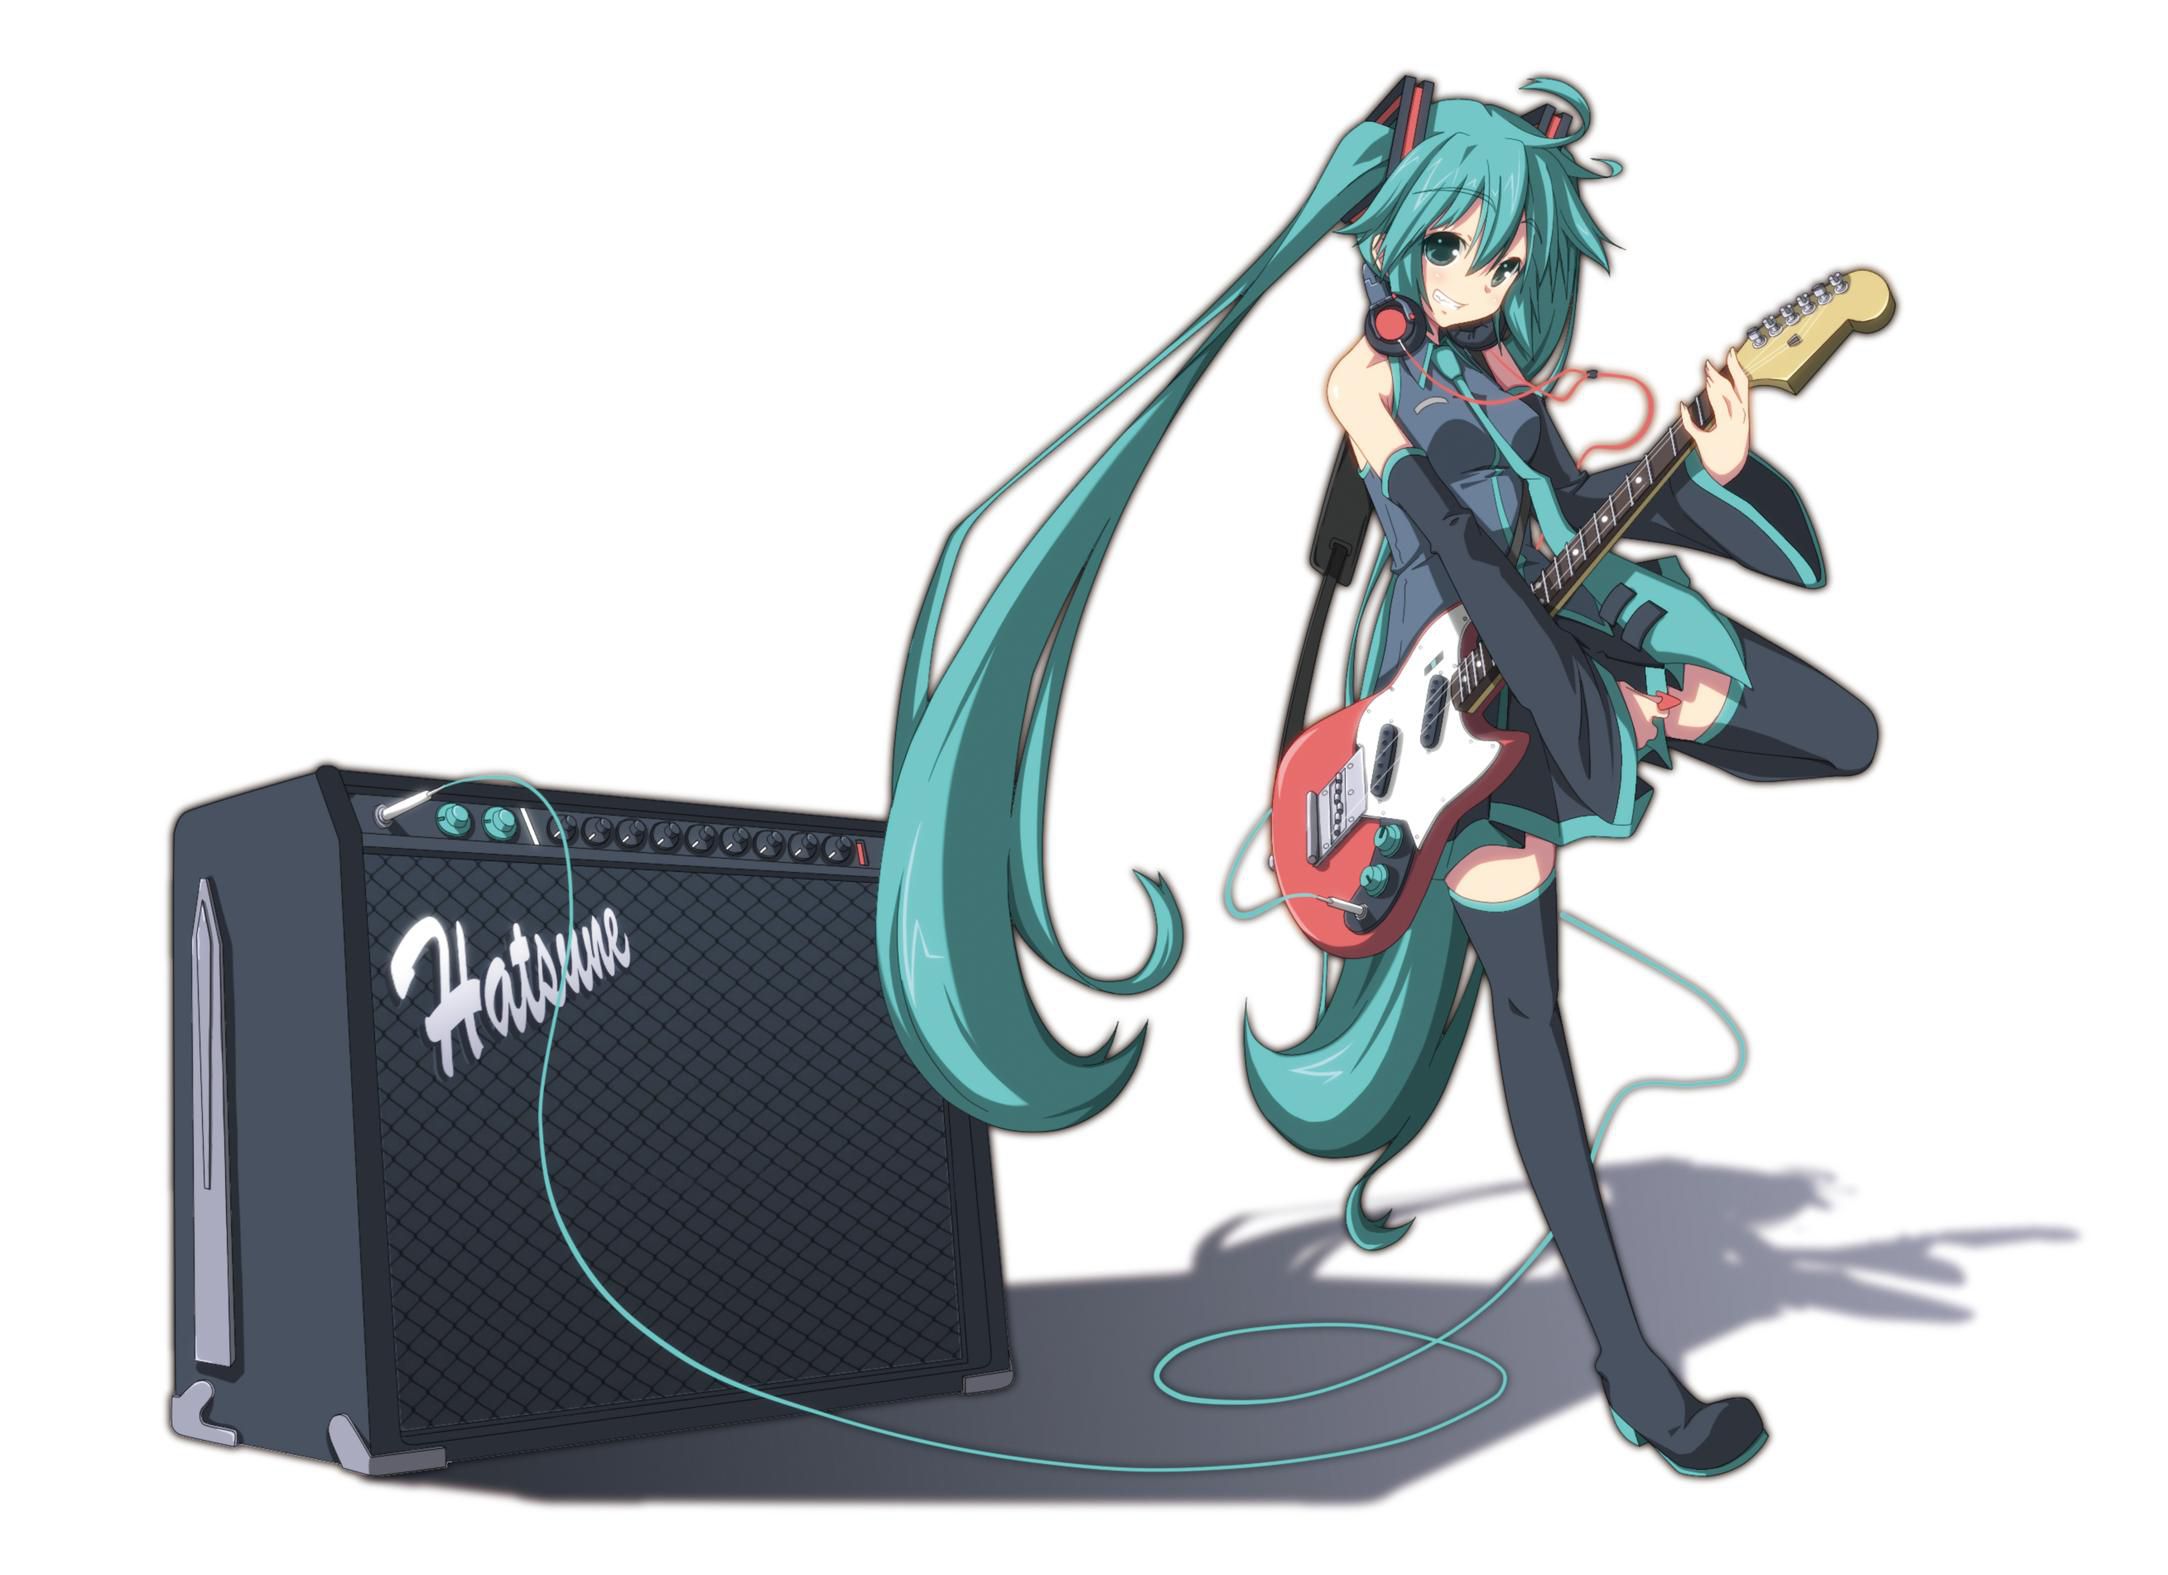 Miku's other, vocaloid's image summary. Vol. 3 9